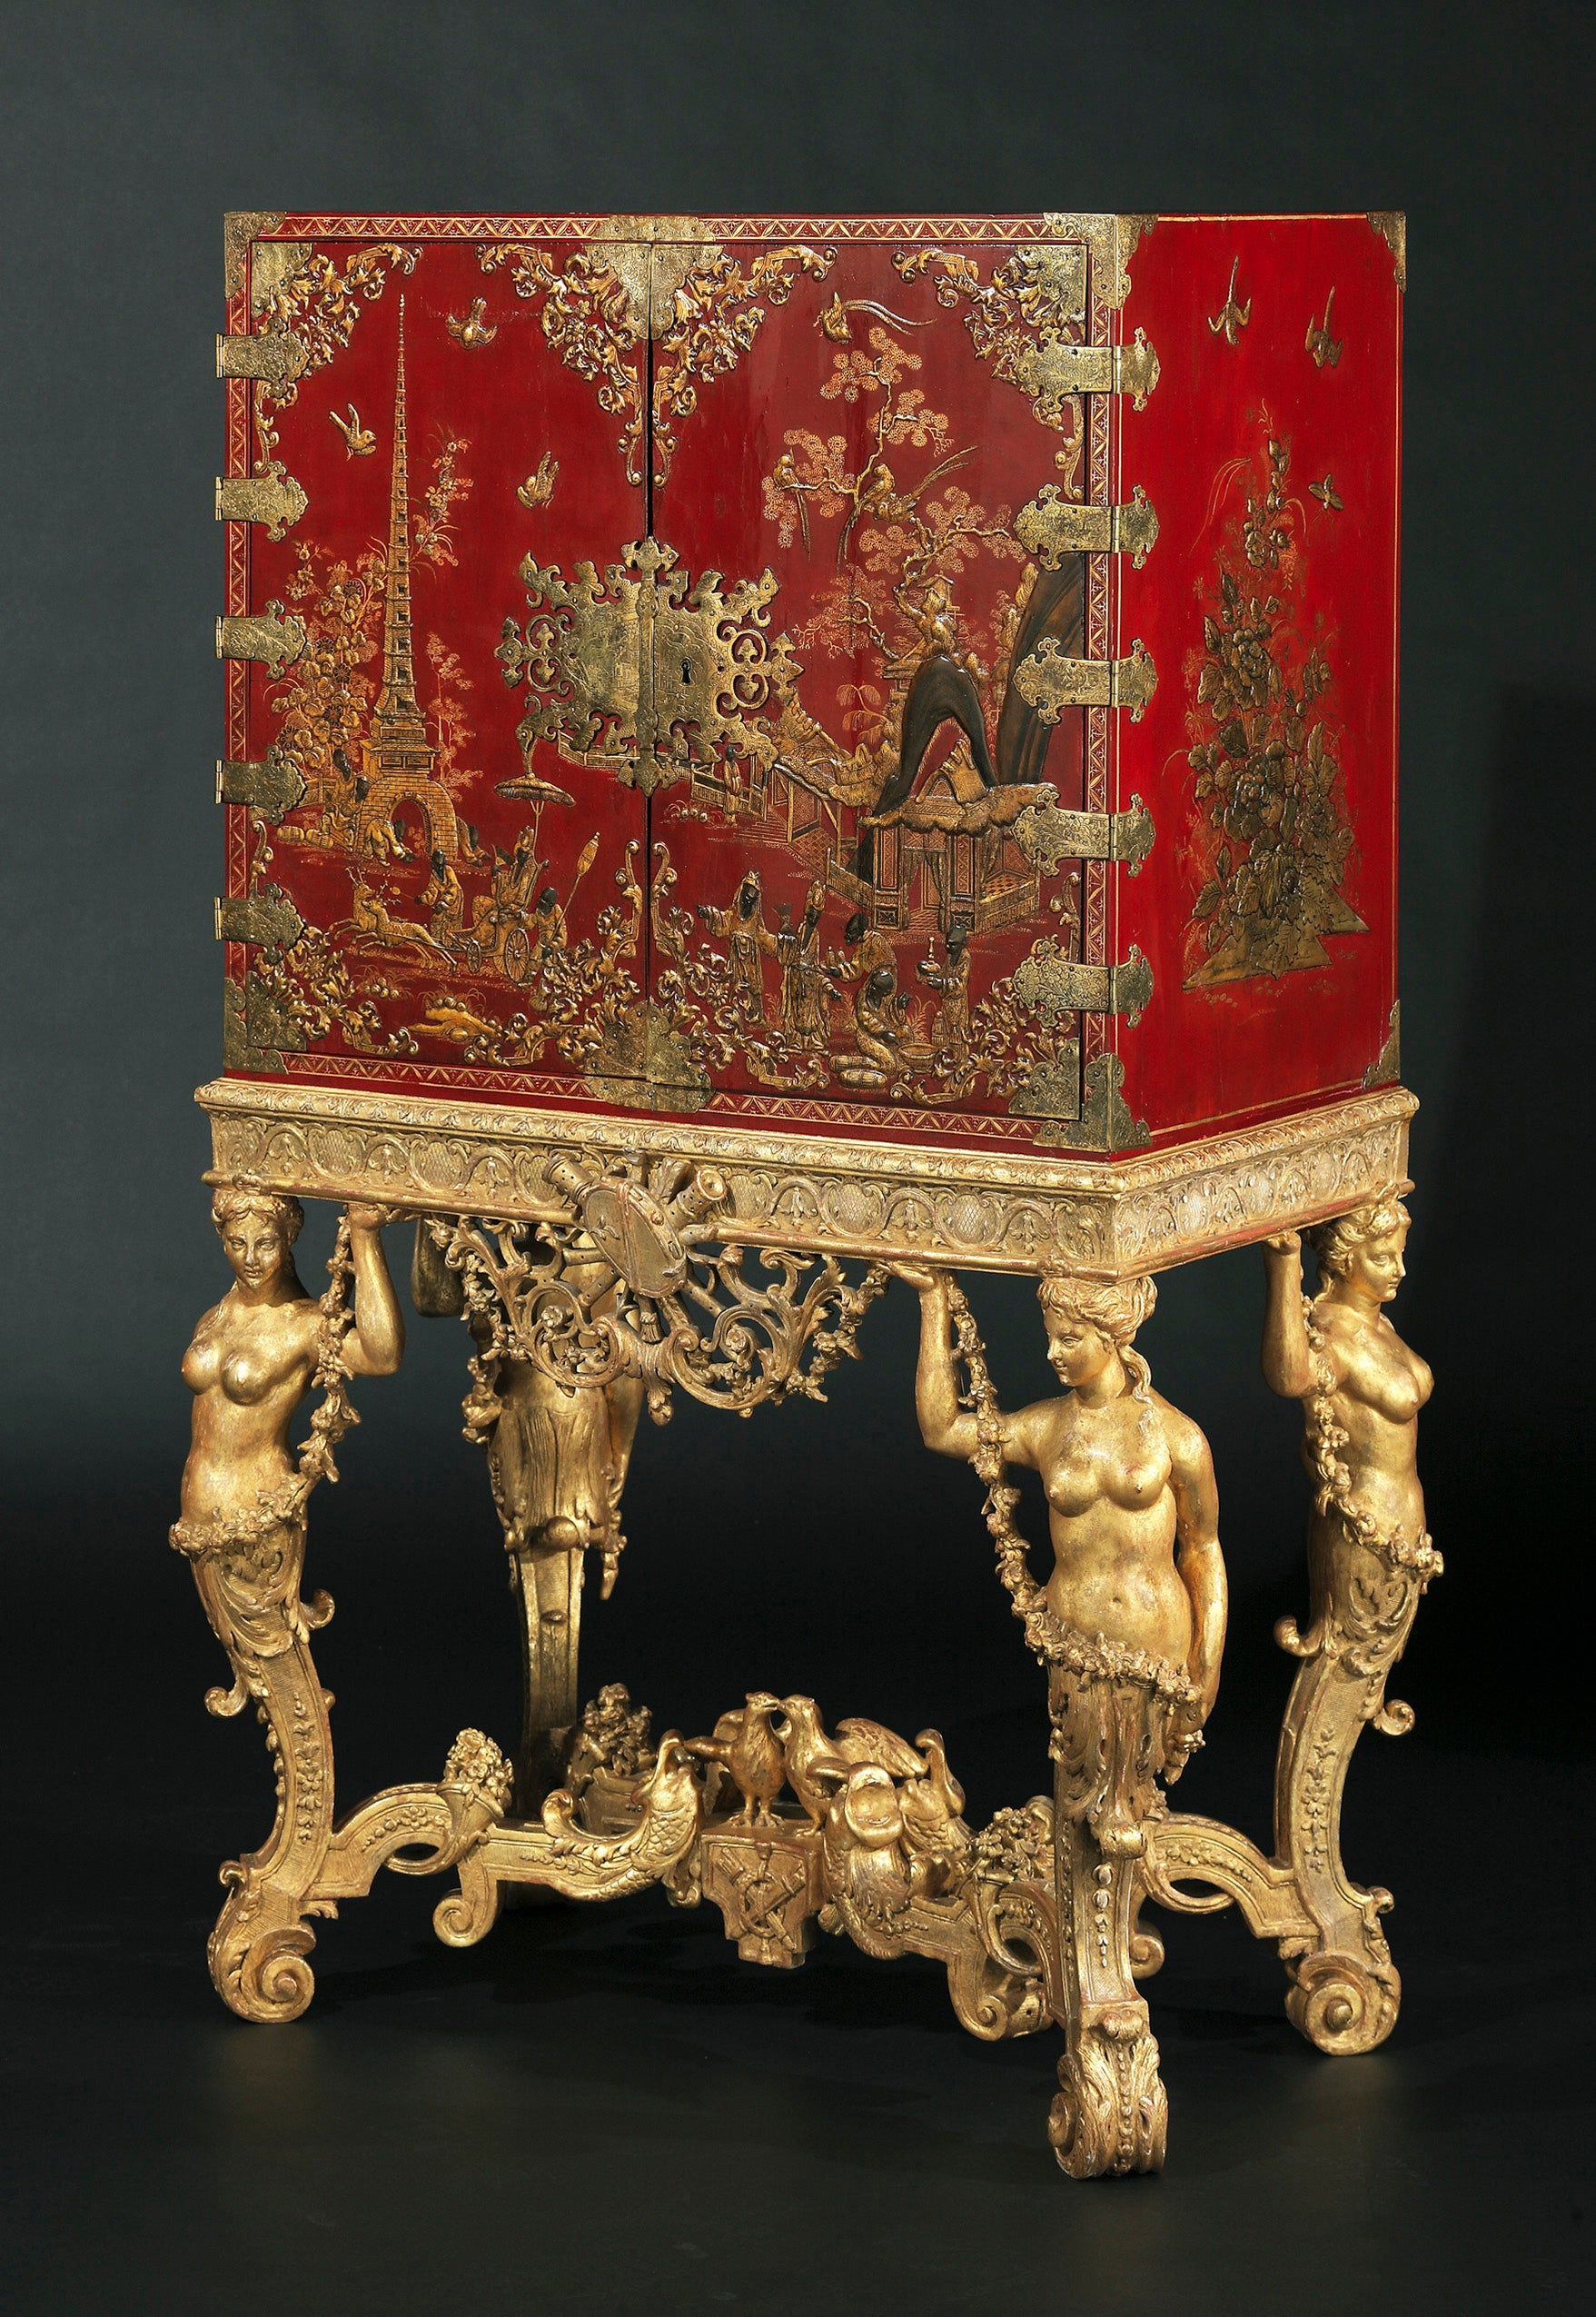 A William III Parcel-Gilt Scarlet-Japanned Brass-Mounted Cabinet On a Stand